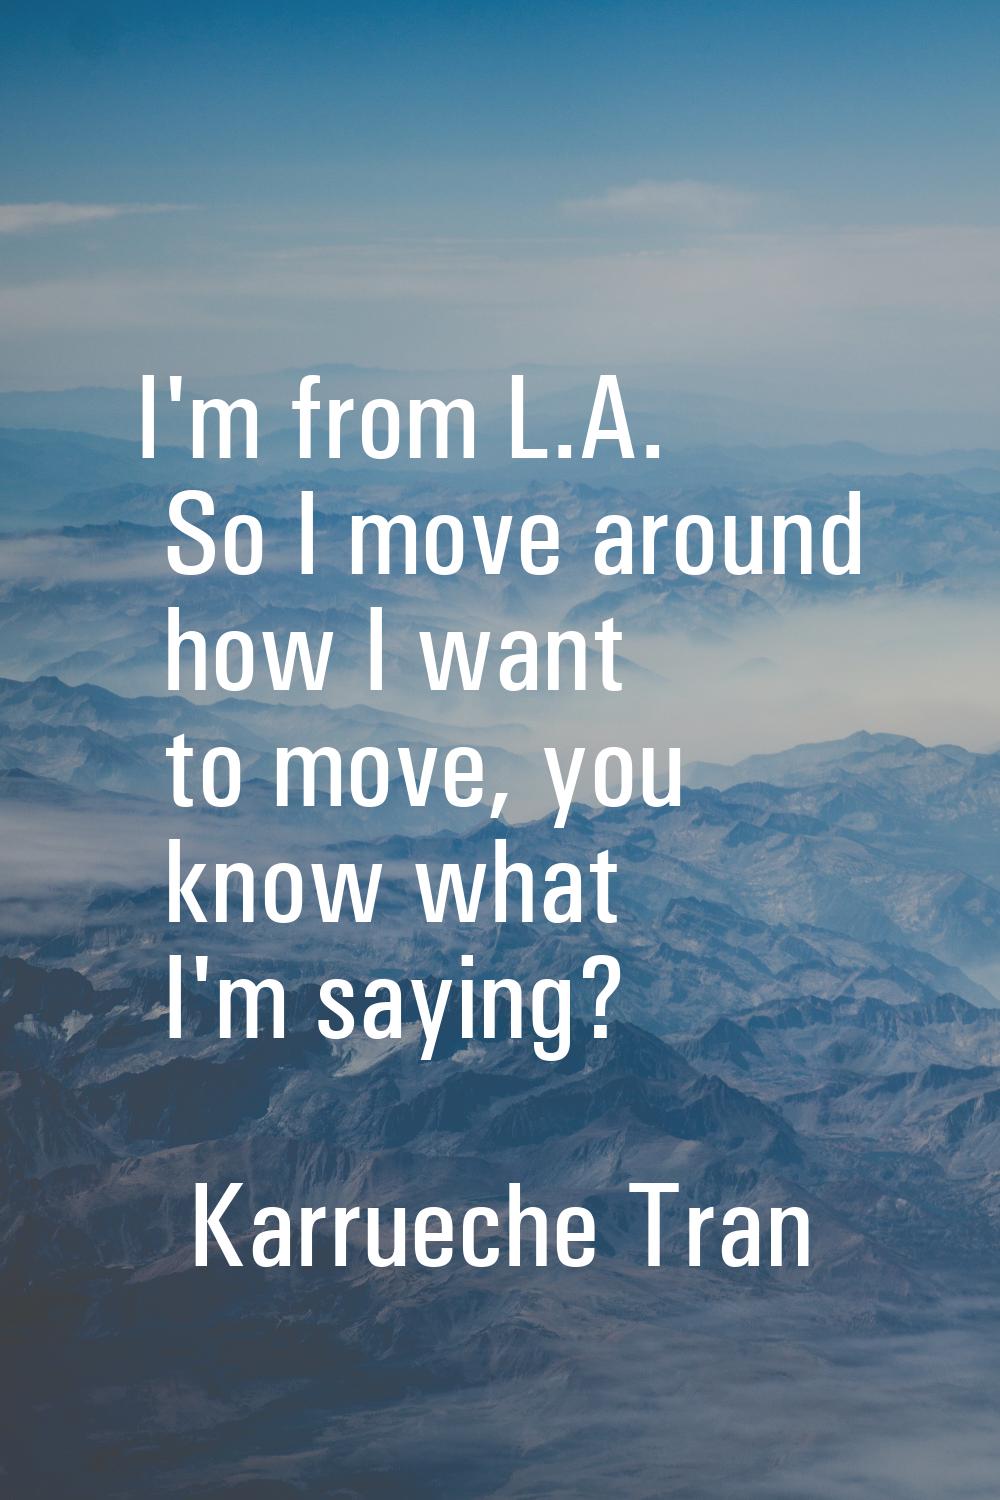 I'm from L.A. So I move around how I want to move, you know what I'm saying?